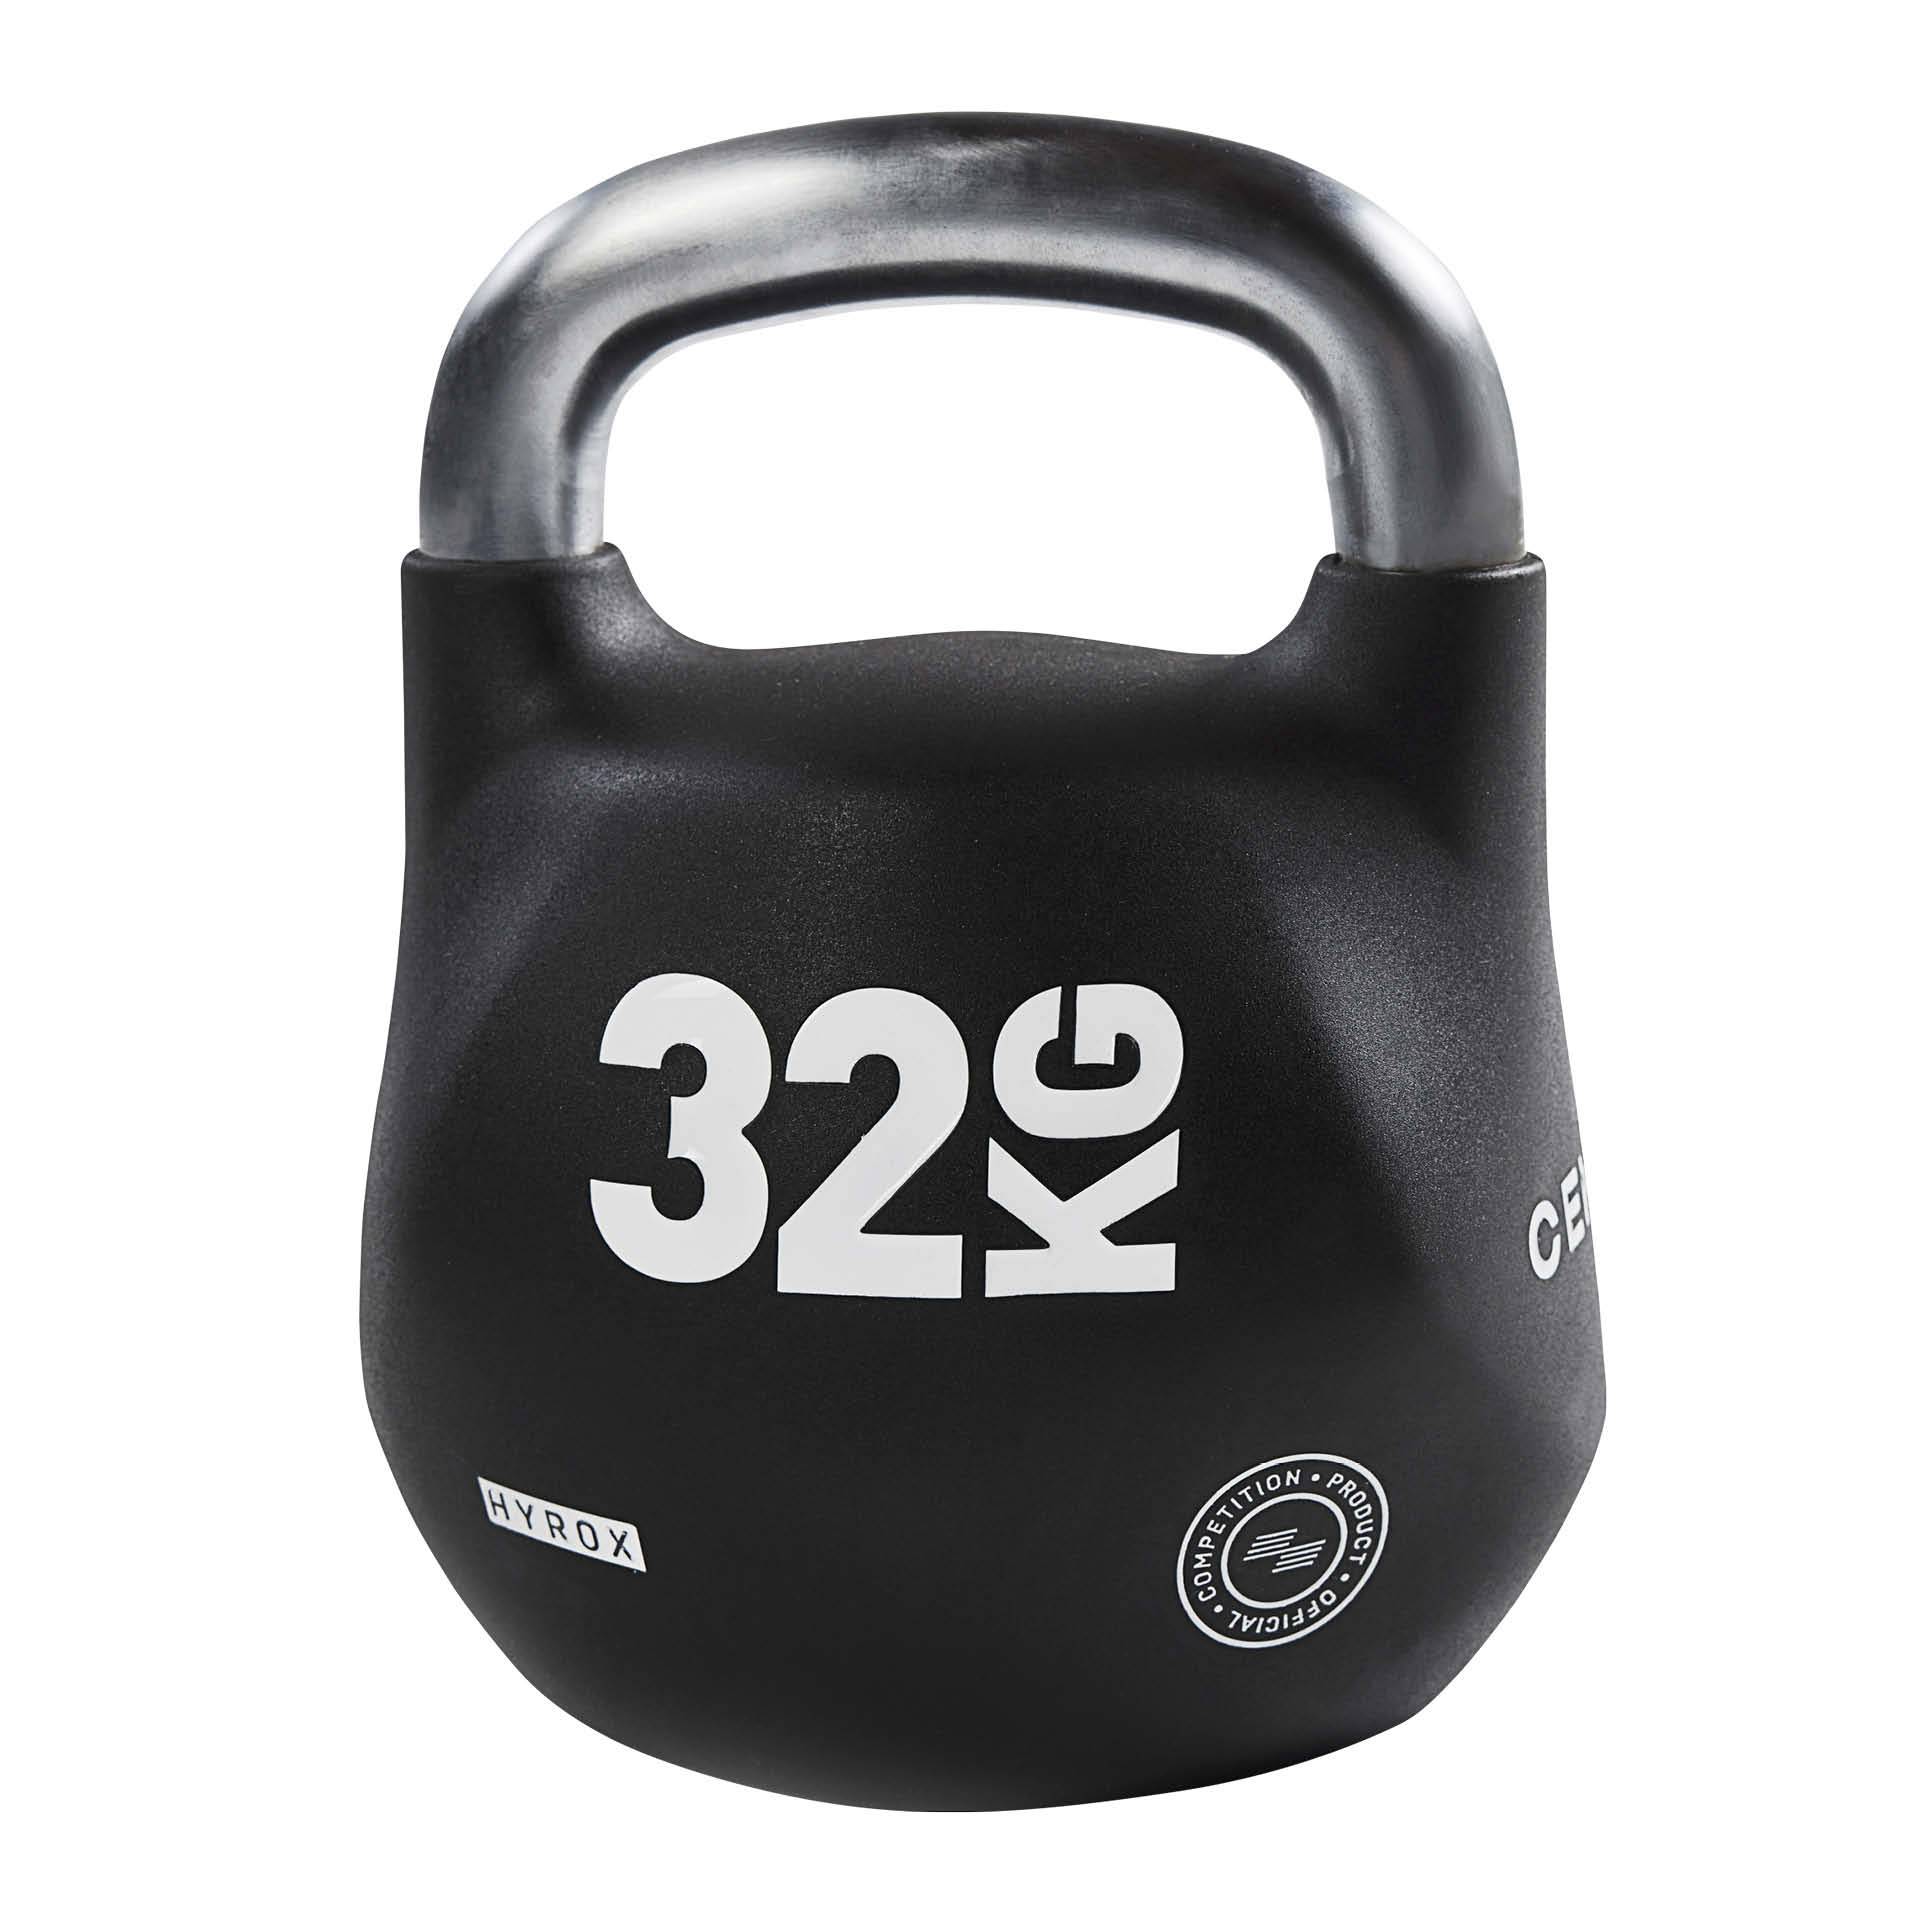 CENTR x HYROX Competition Octo Kettlebell 32 kg von Perform Better